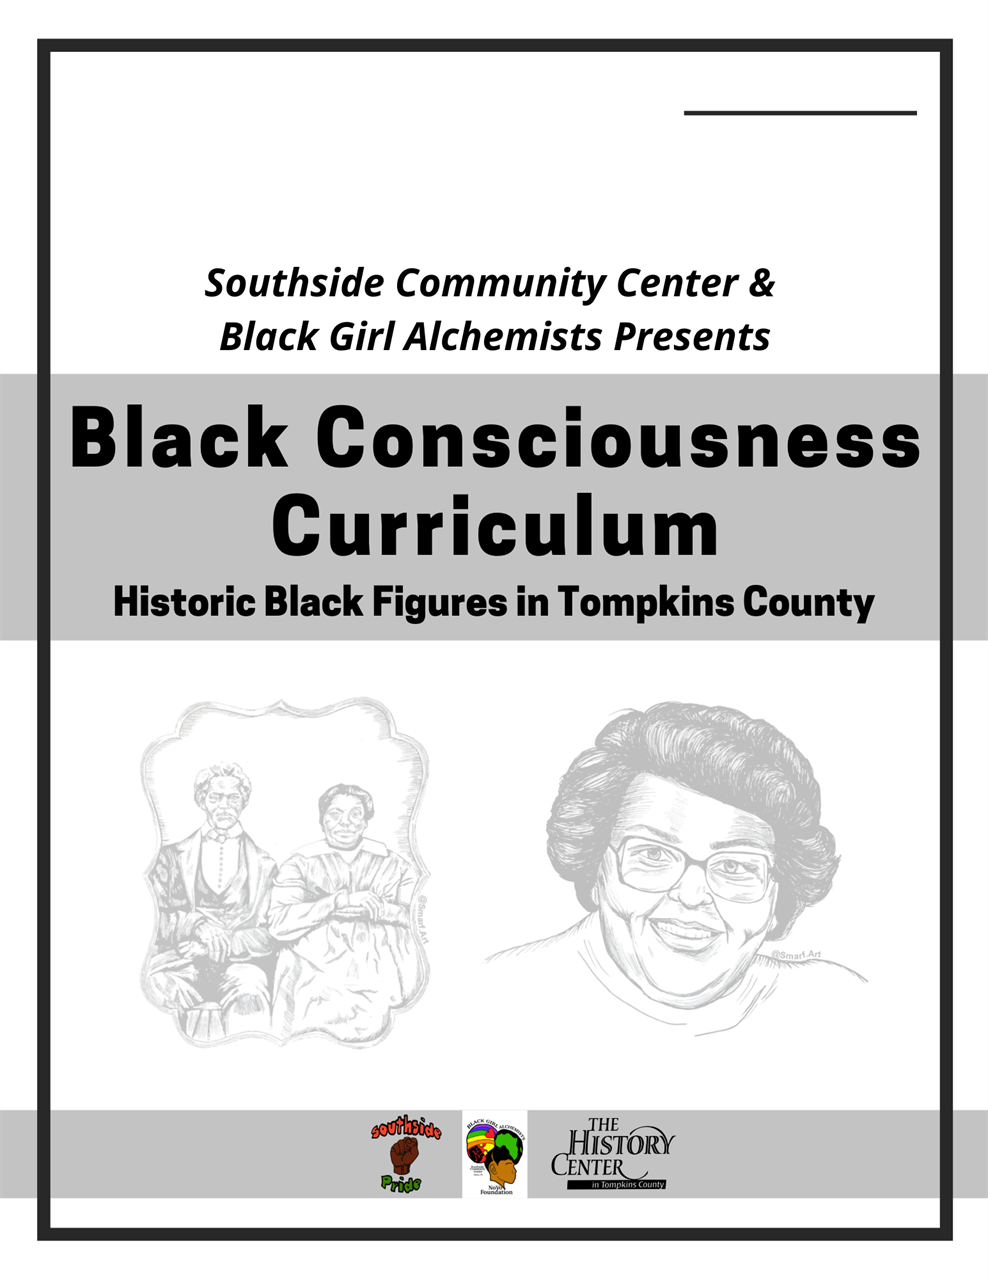 A link/image to a downloadable activity called "Black Consciousness Curriculum Historical Black Figures in Tompkins County"